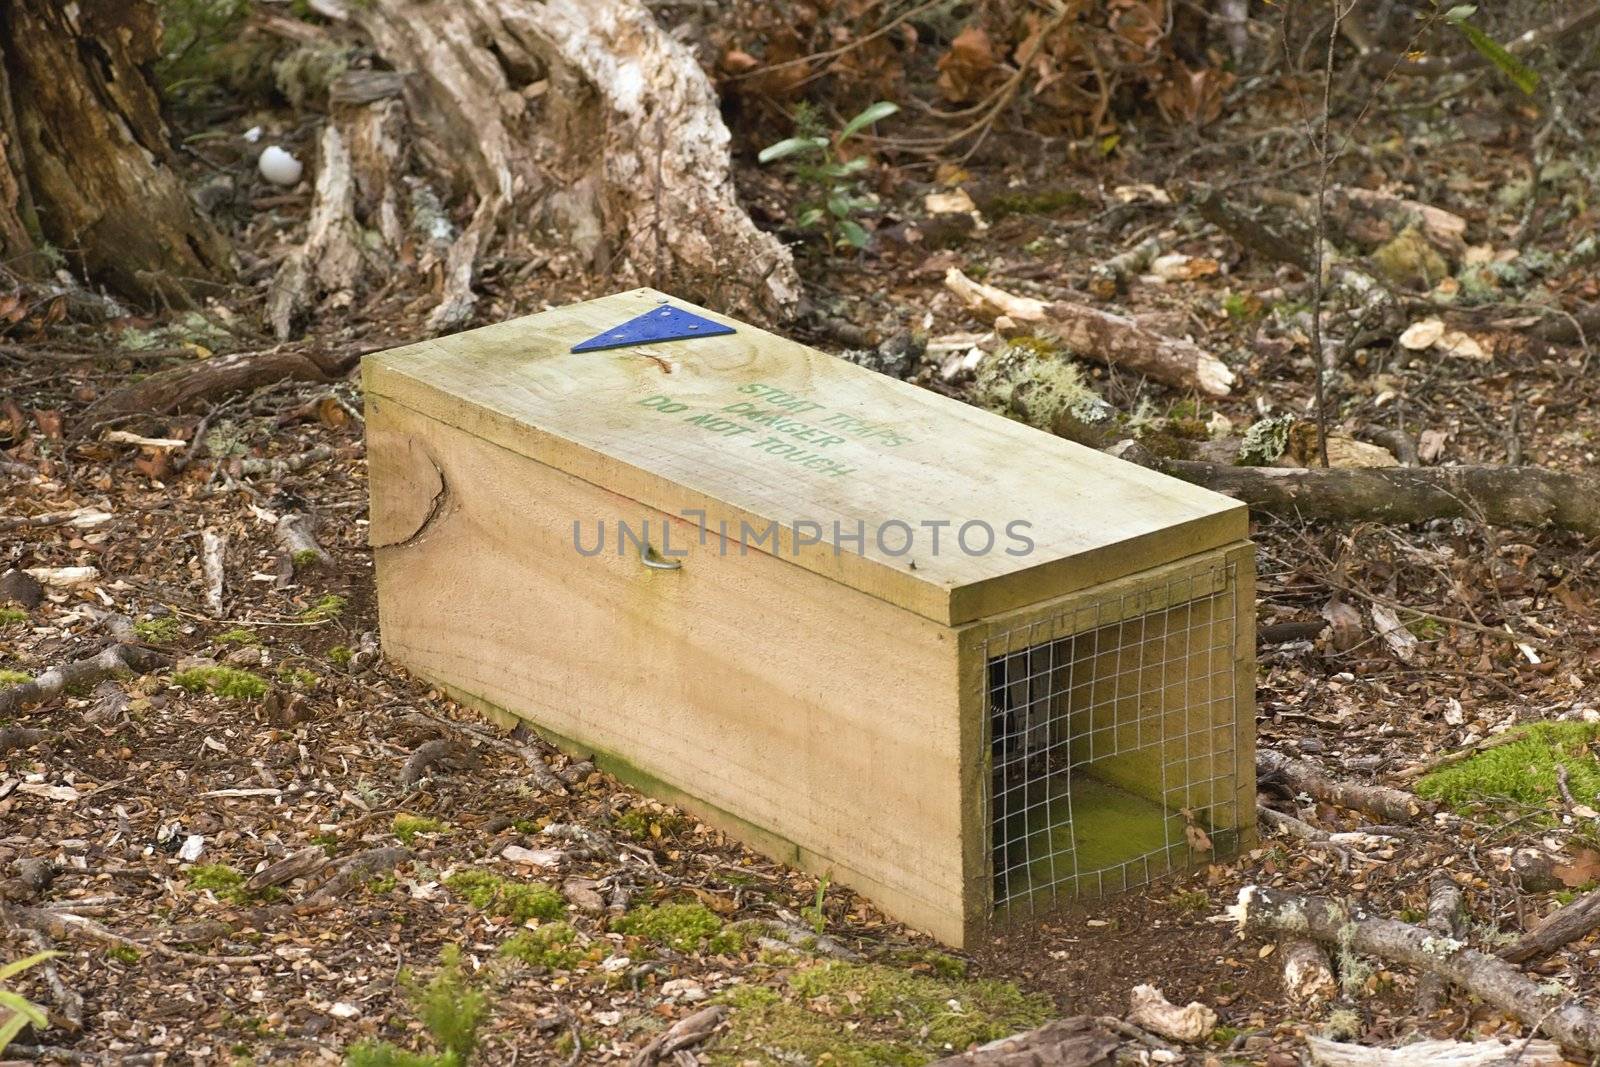 A stoat trap laid in Boundary Stream Reserve, Hawke's Bay, New Zealand. Stoats are a pest in New Zealand as they are not native and eat the eggs of the Kiwi - an endangered flightless bird. The kiwi have been reintroduced to the Boundary Stream Reserve in an attempt to save the Kiwi from extinction. The traps are laid with chicken eggs as bait.